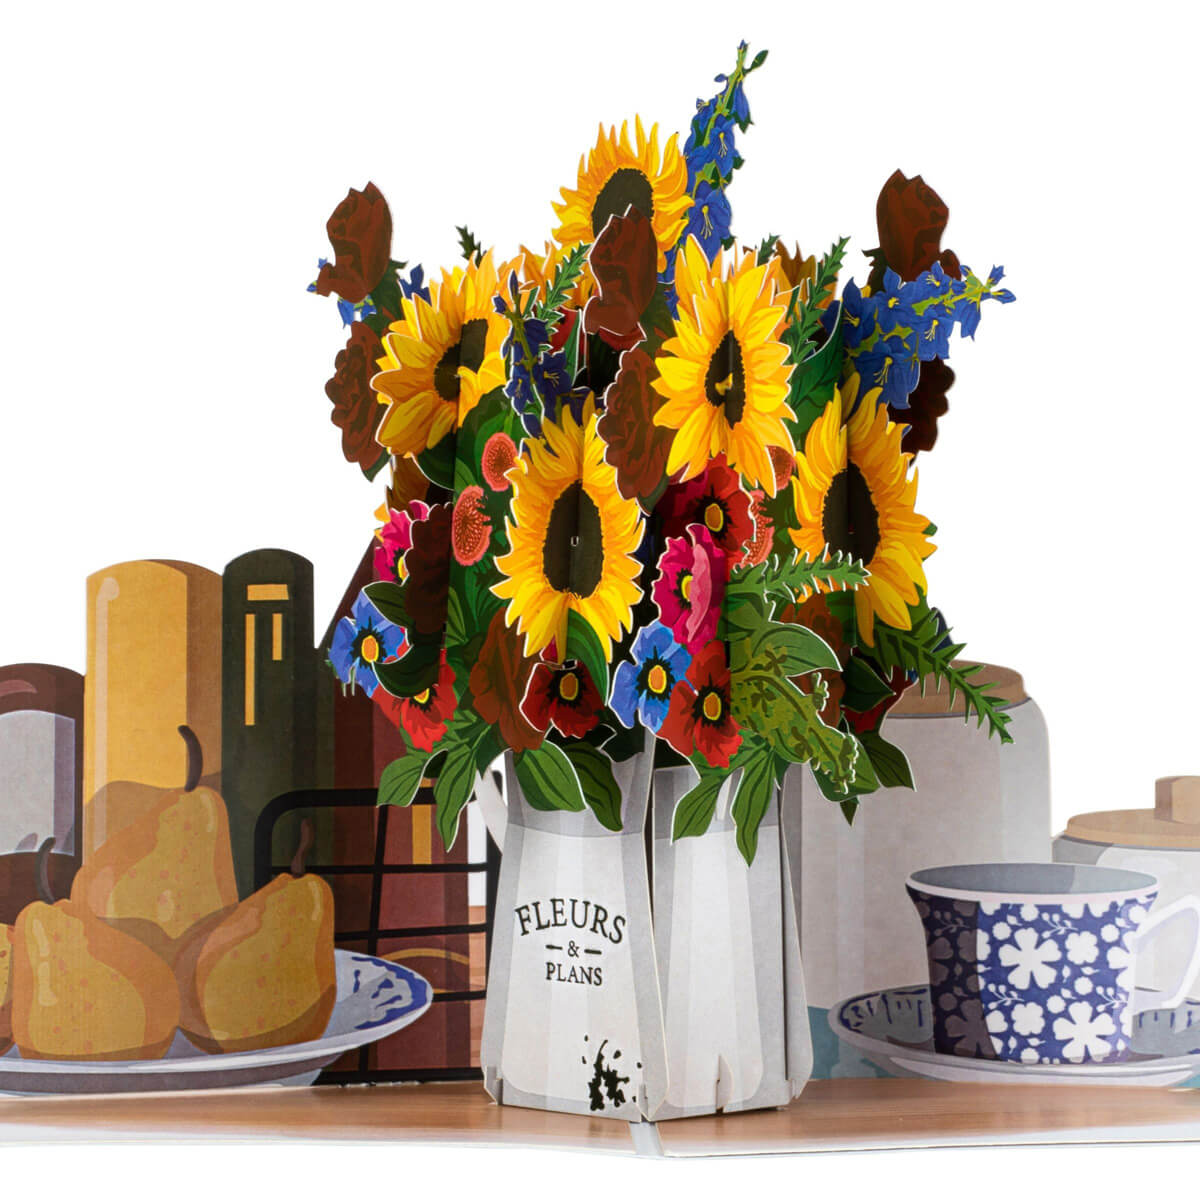 Sunflowers Pop Up Card by Cardology which is perfect for Birthdays, Mothers Day, Anniversaries or even New Home Congratulations. This image is a close up of the pop up which is a beautiful 3D flower arrangement of sunflowers in a vase sitting on a kitchen table top.